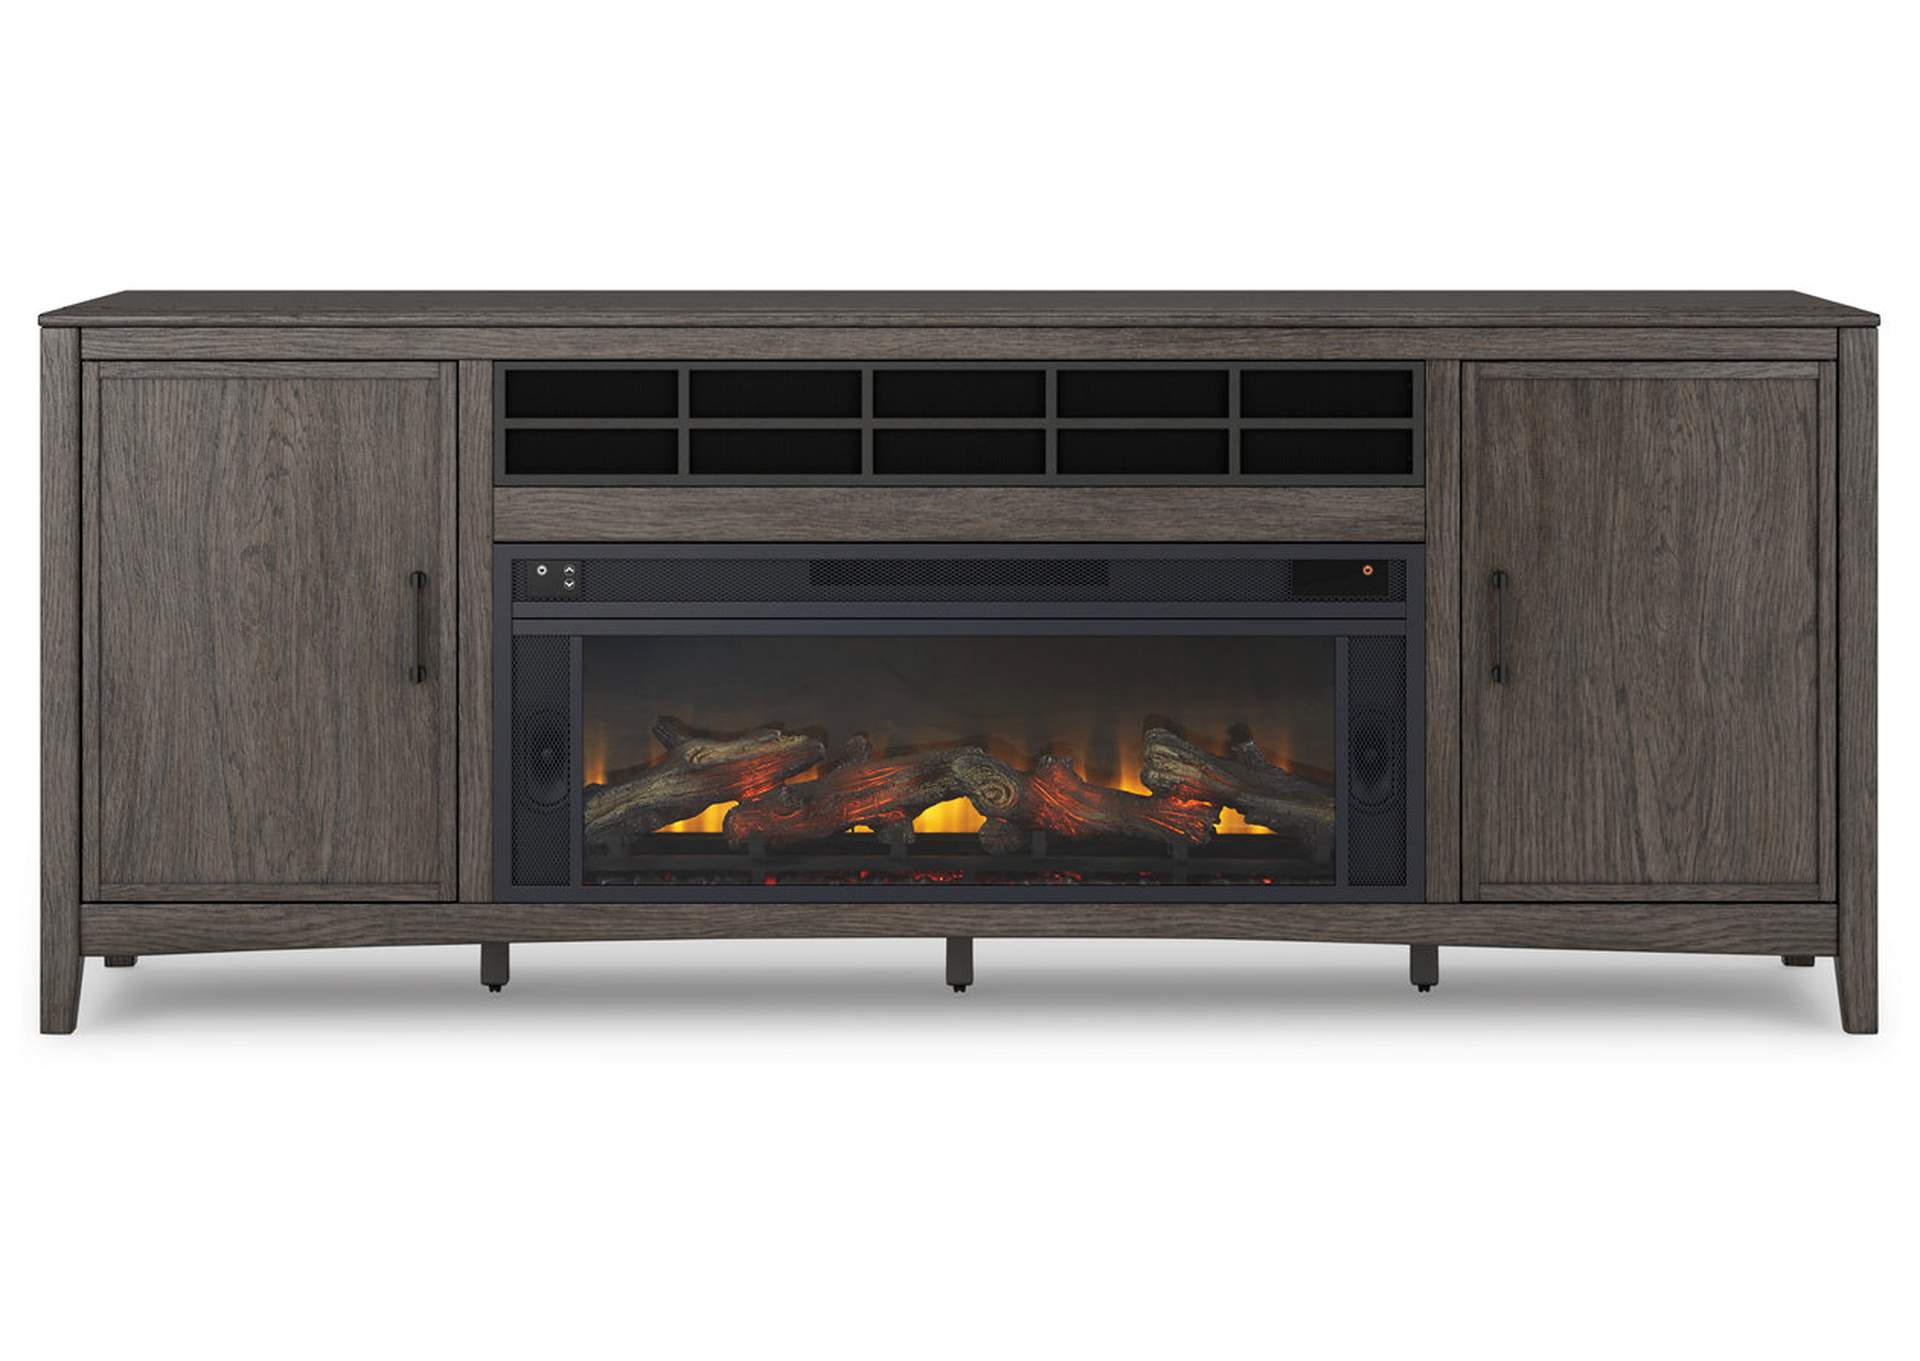 Montillan 84" TV Stand with Electric Fireplace,Signature Design By Ashley